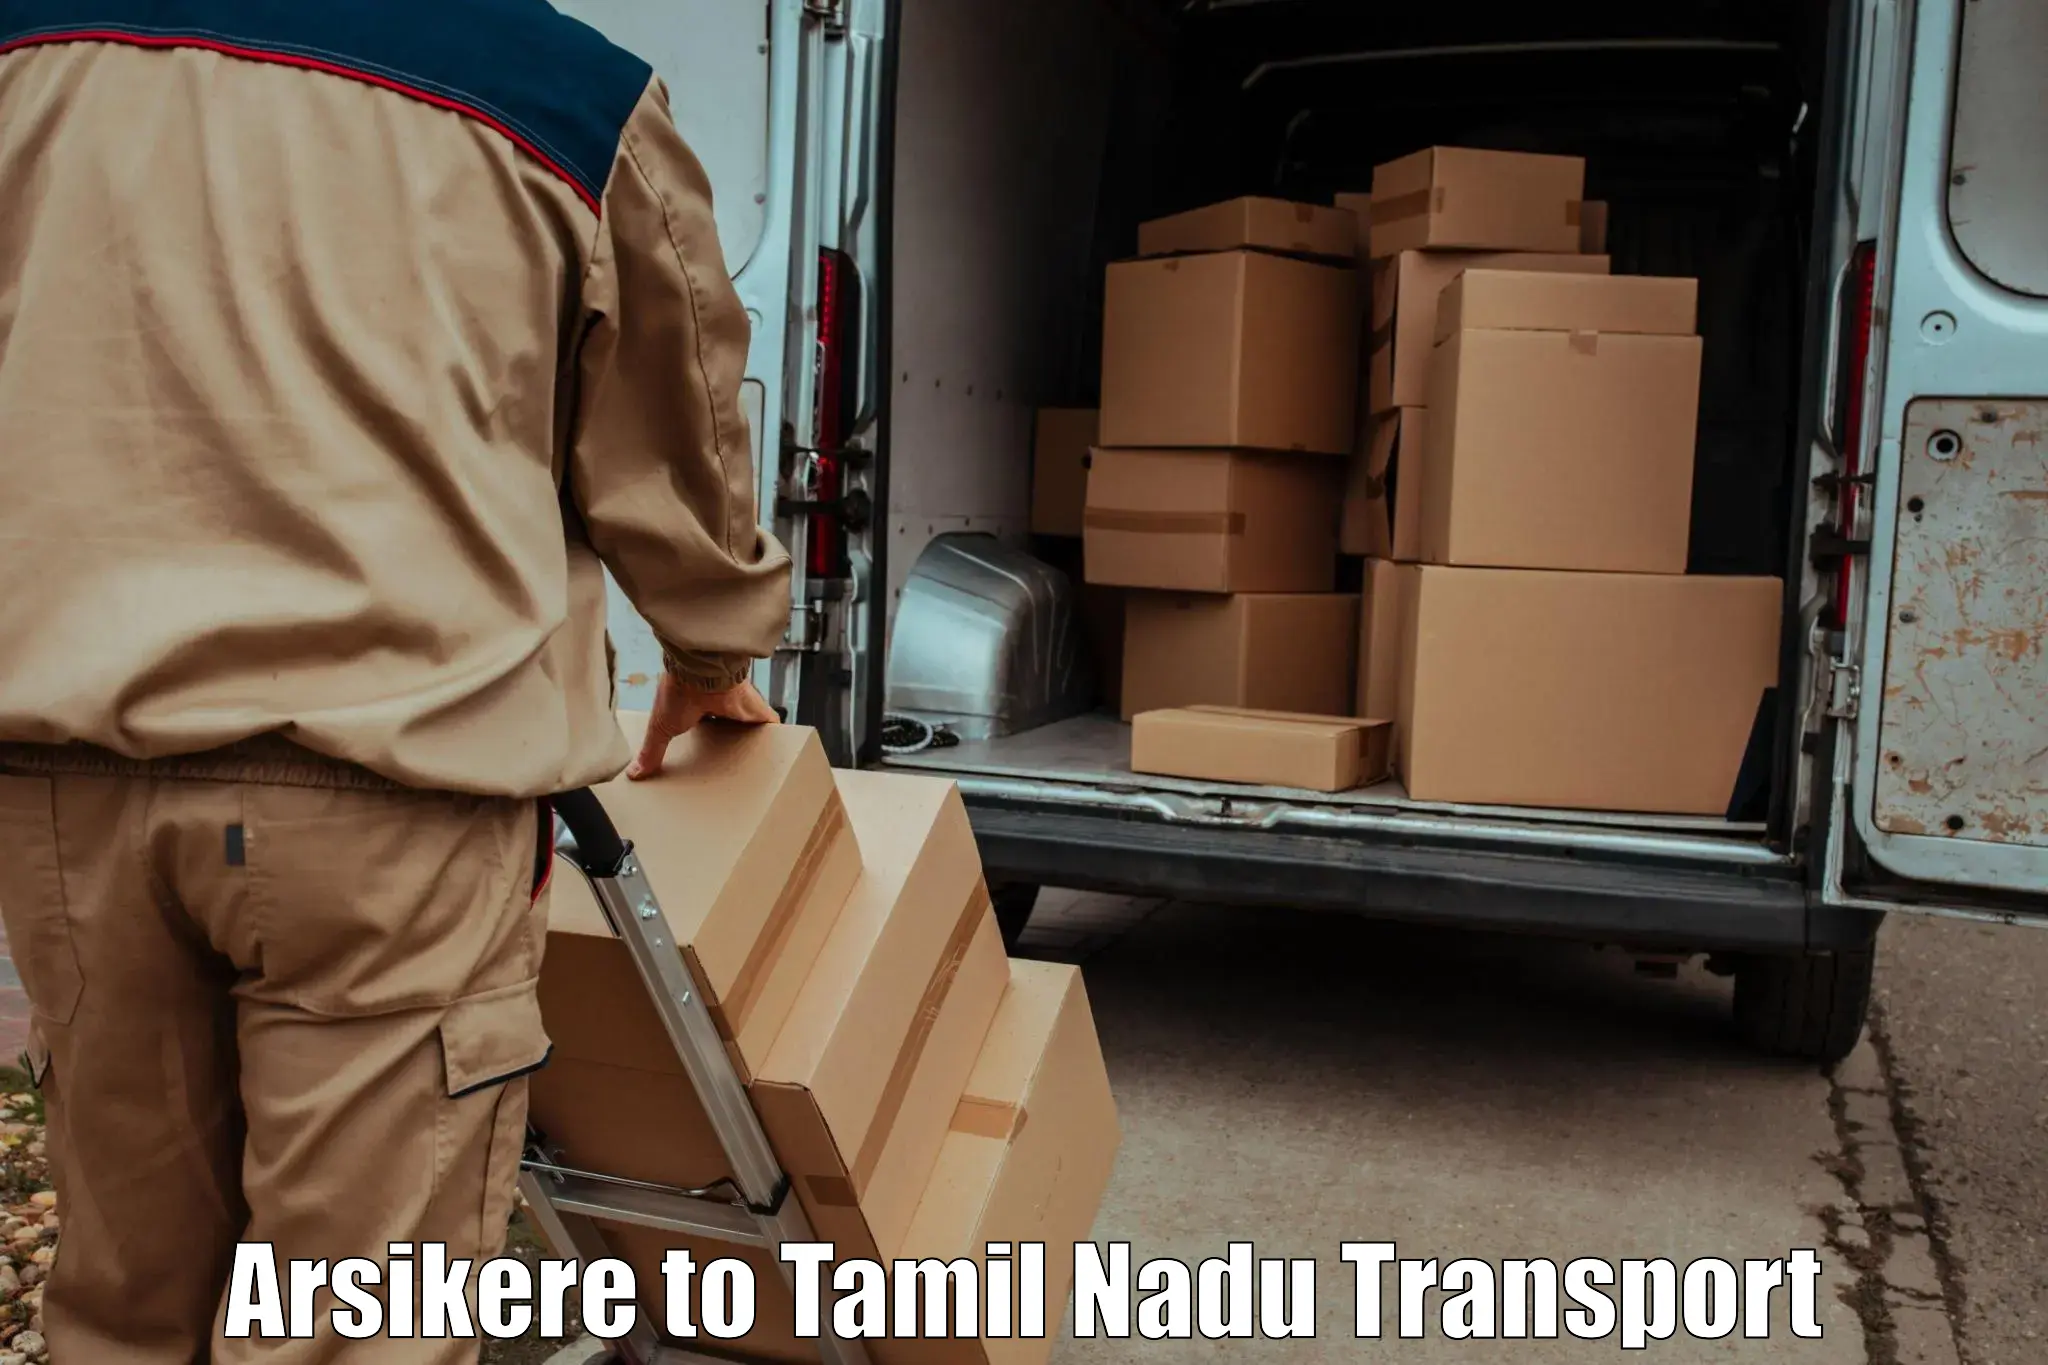 Express transport services Arsikere to Gobichettipalayam